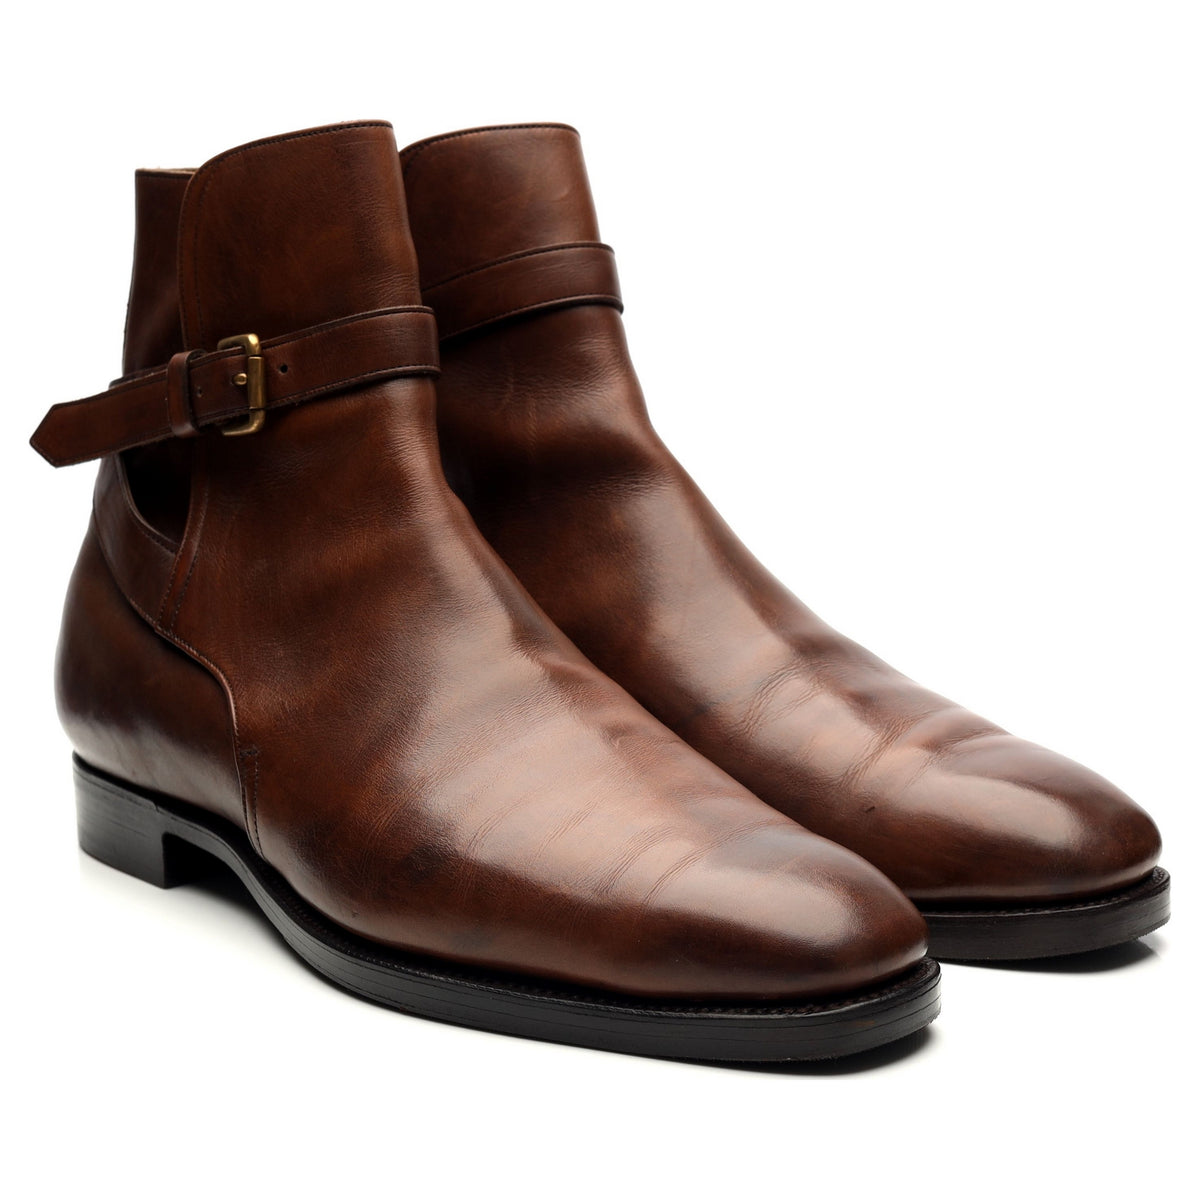 &#39;Lambourne&#39; Brown Leather Boots UK 11.5 E